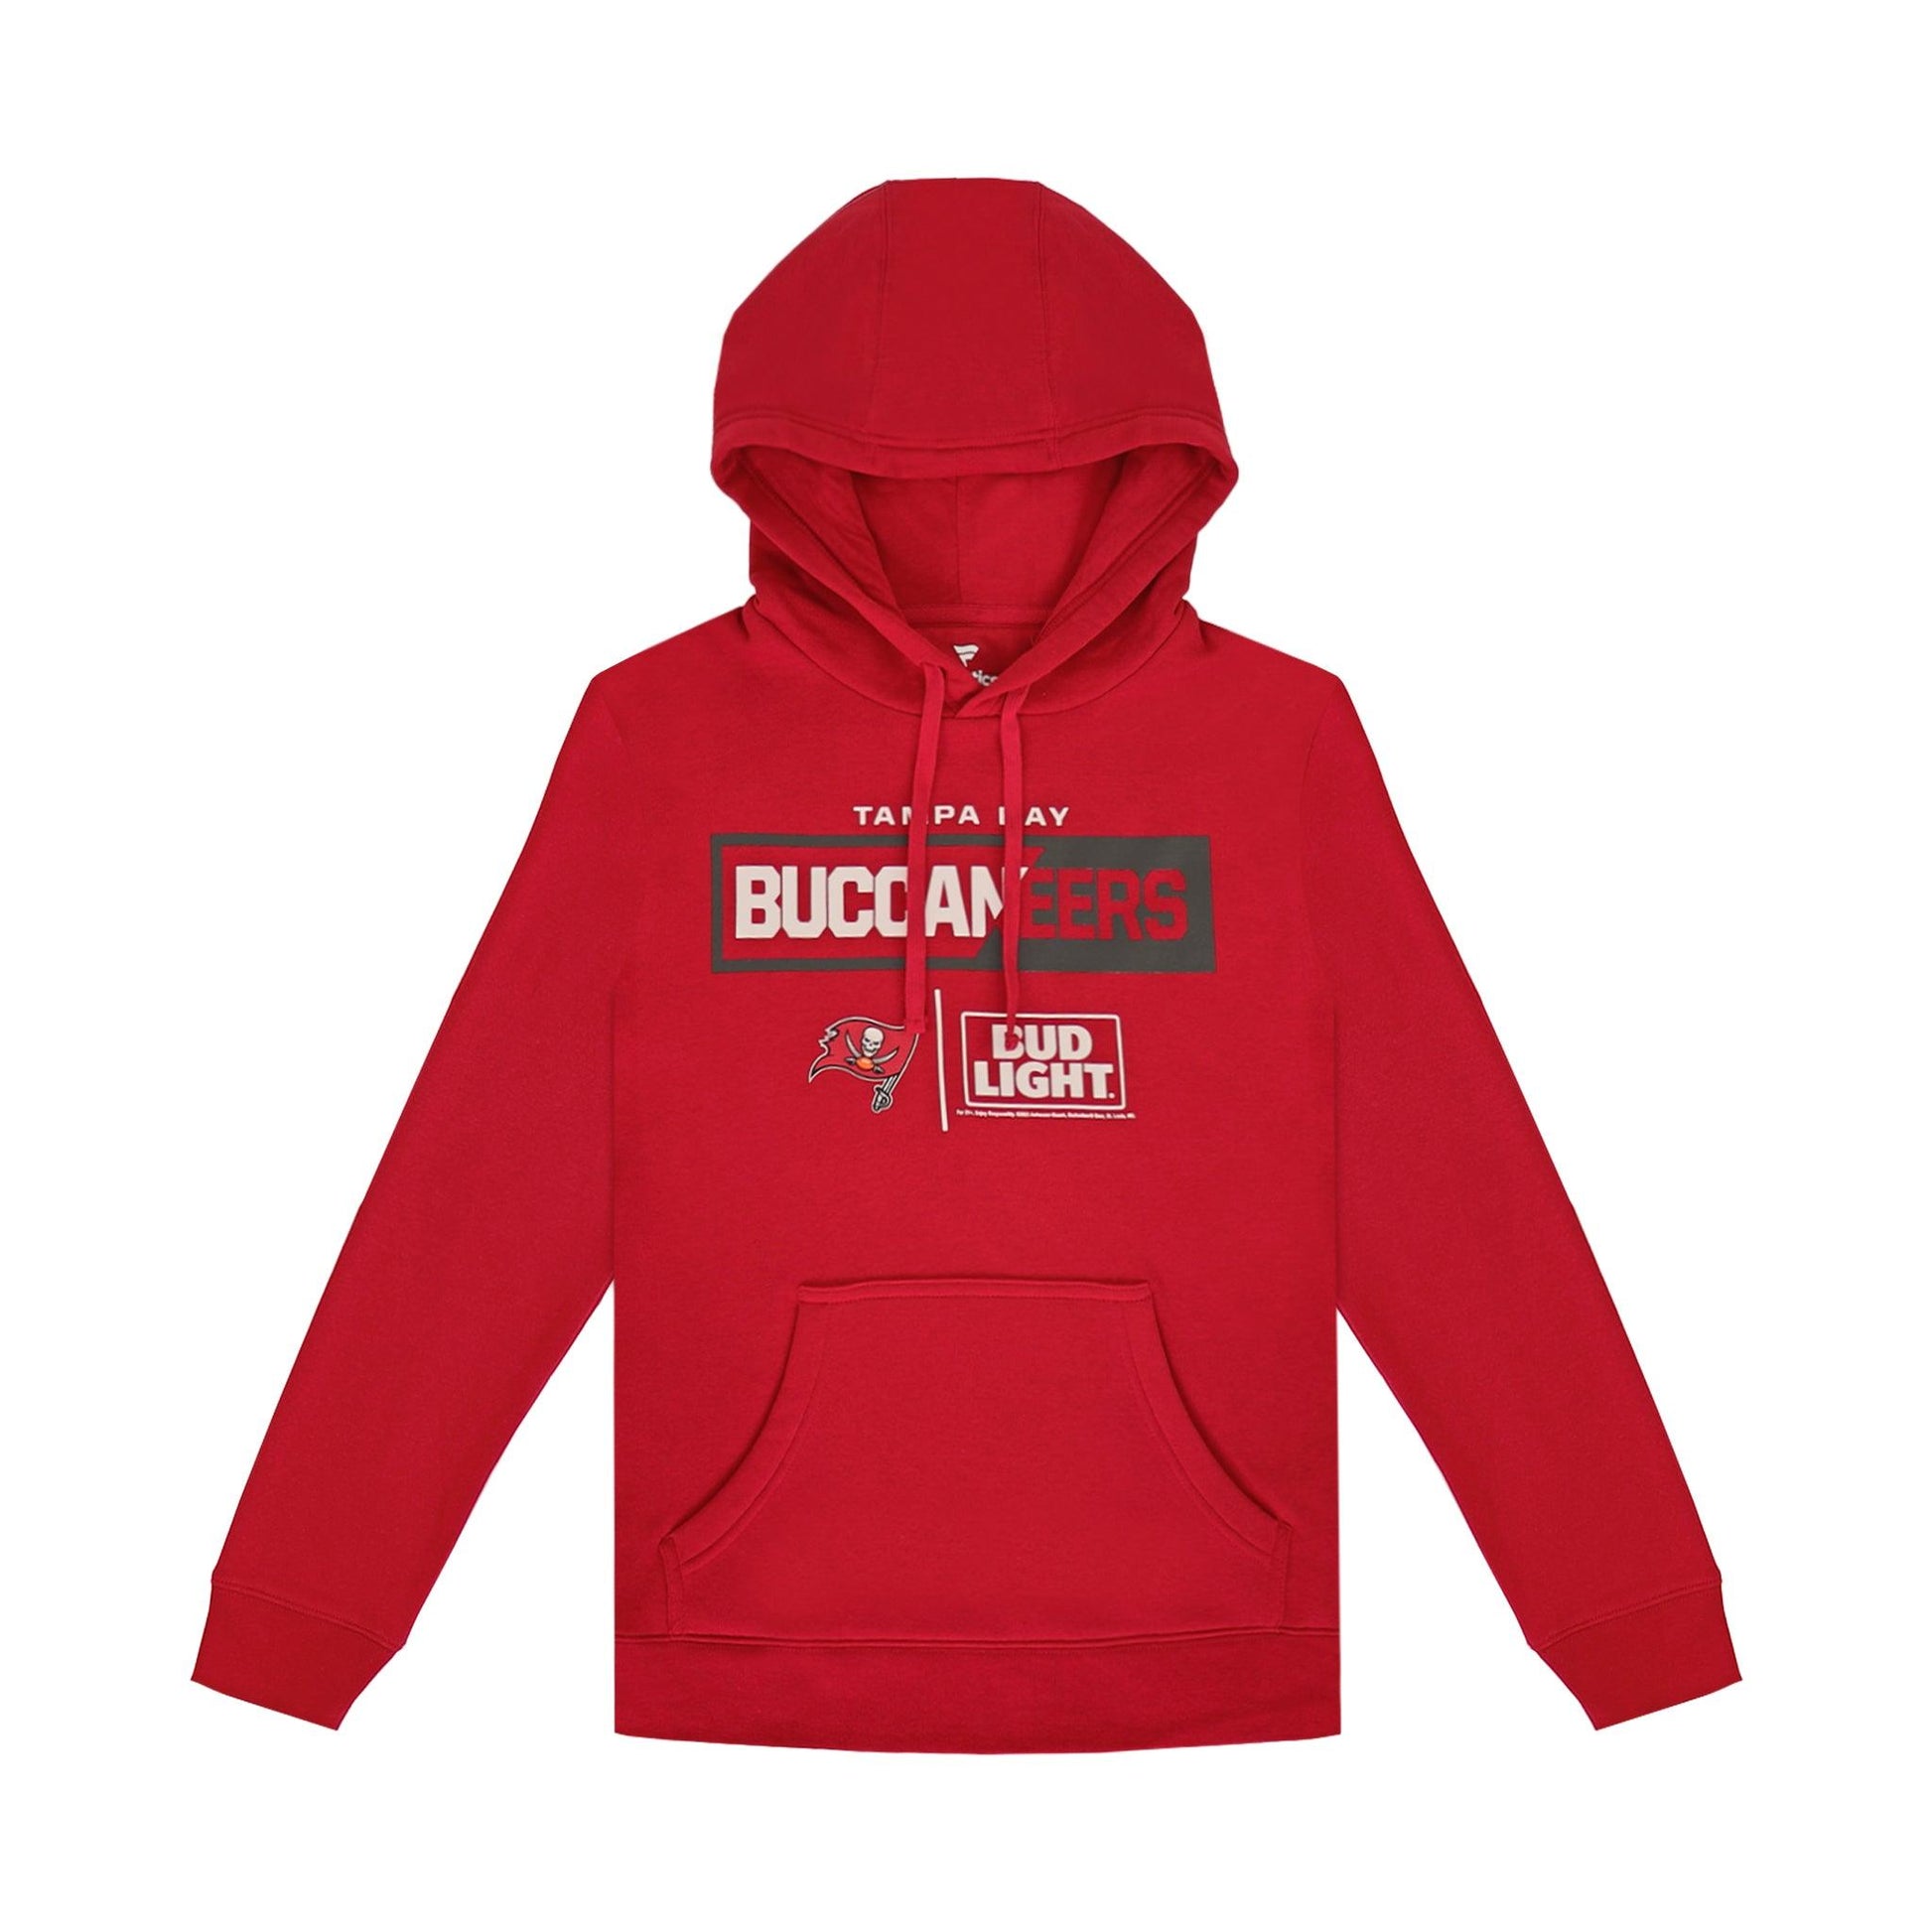 red hoodie with bucs and bud light logo 